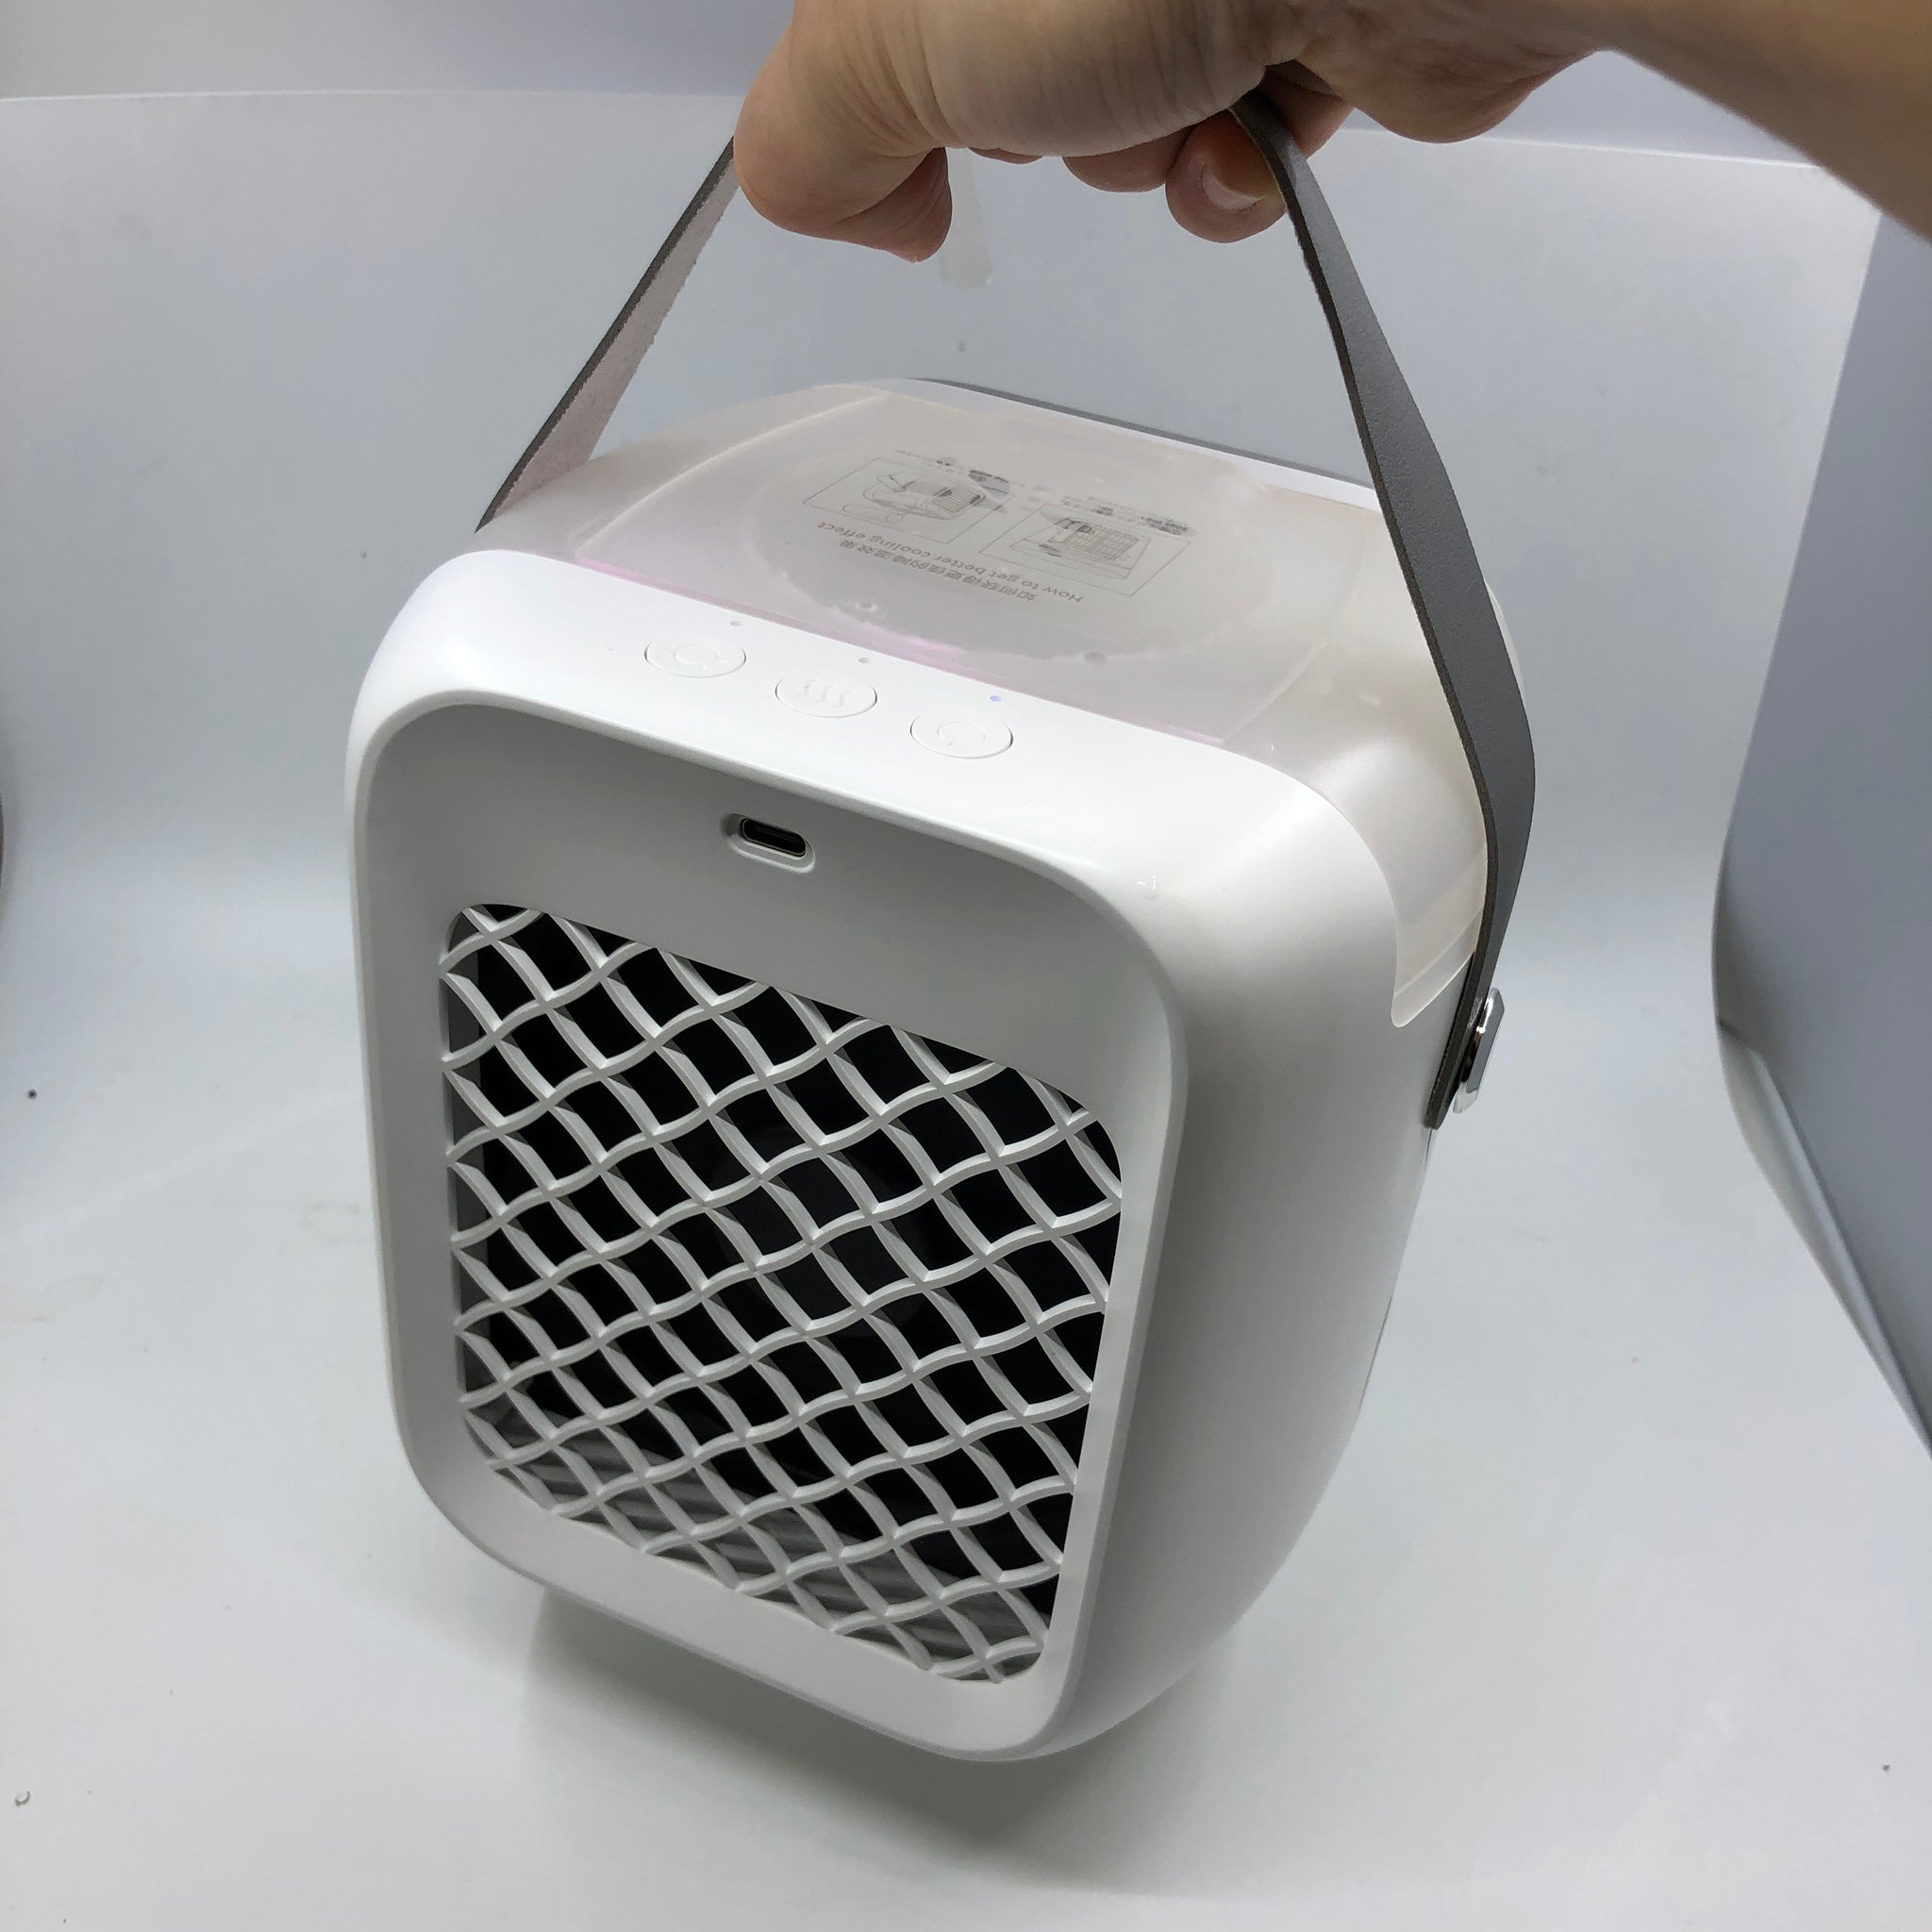 ultra cool portable air conditioner